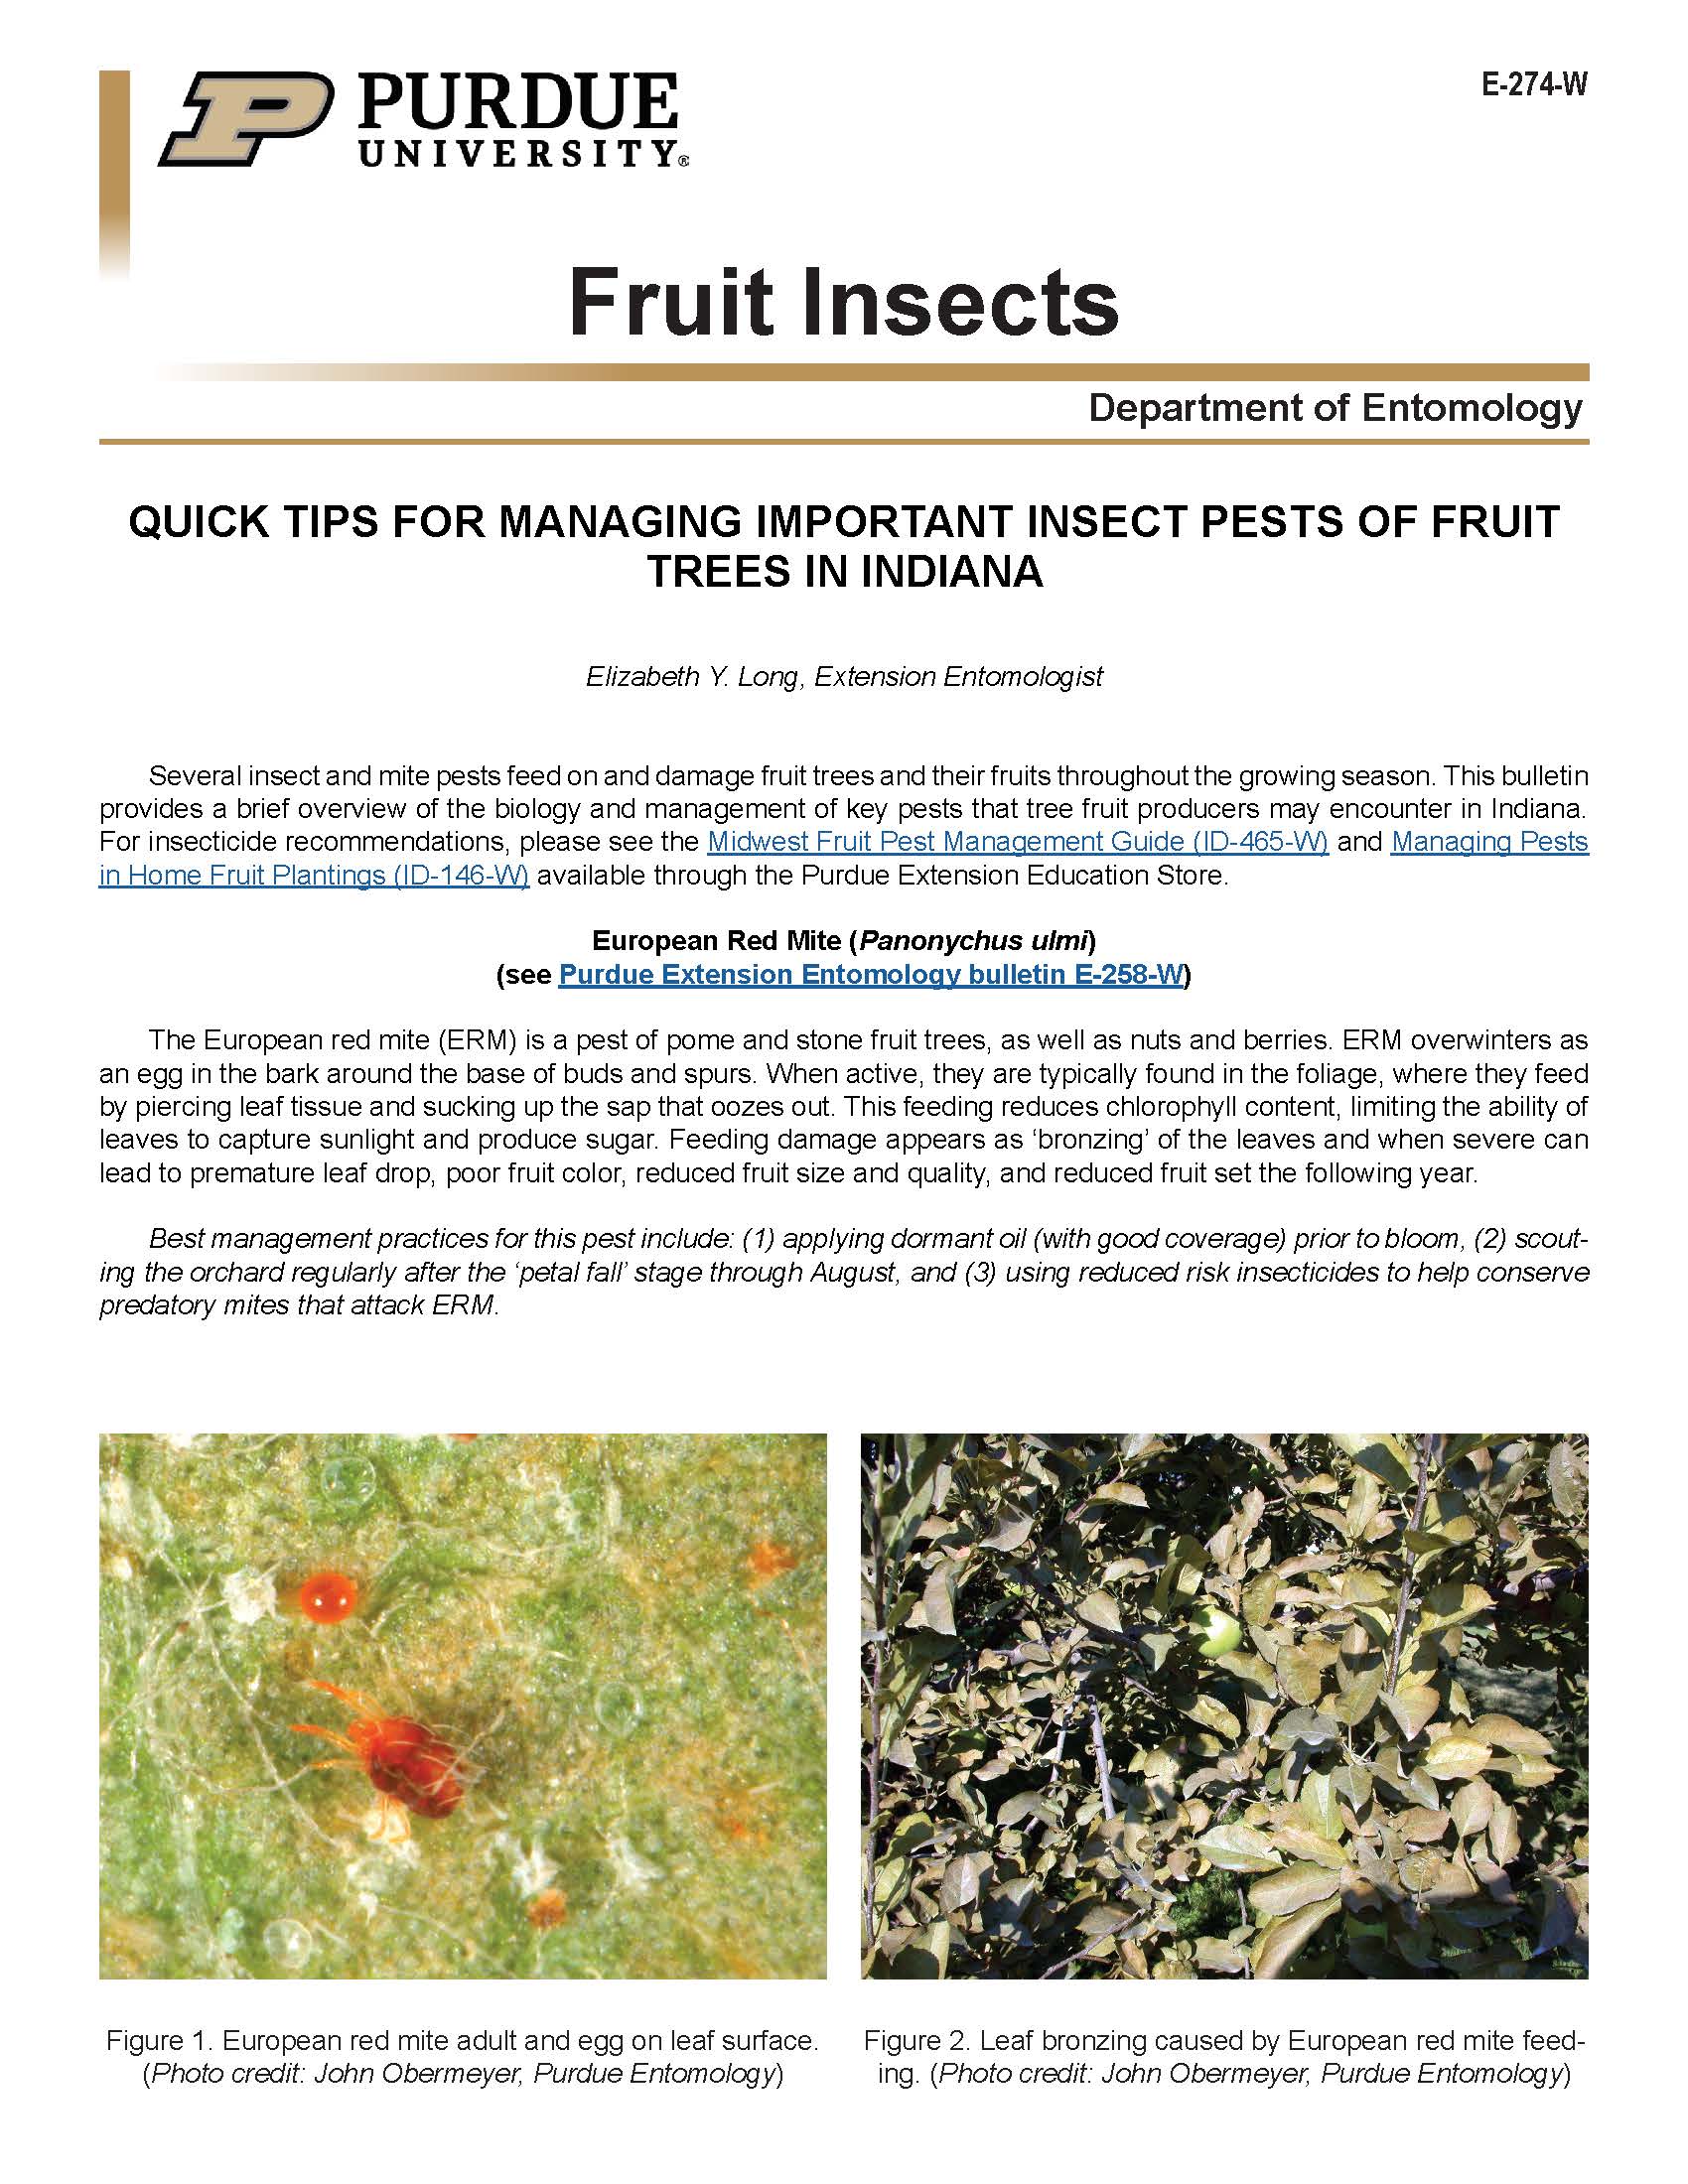 Quick Tips for Managing Important Insect Pests of Fruit Trees in Indiana